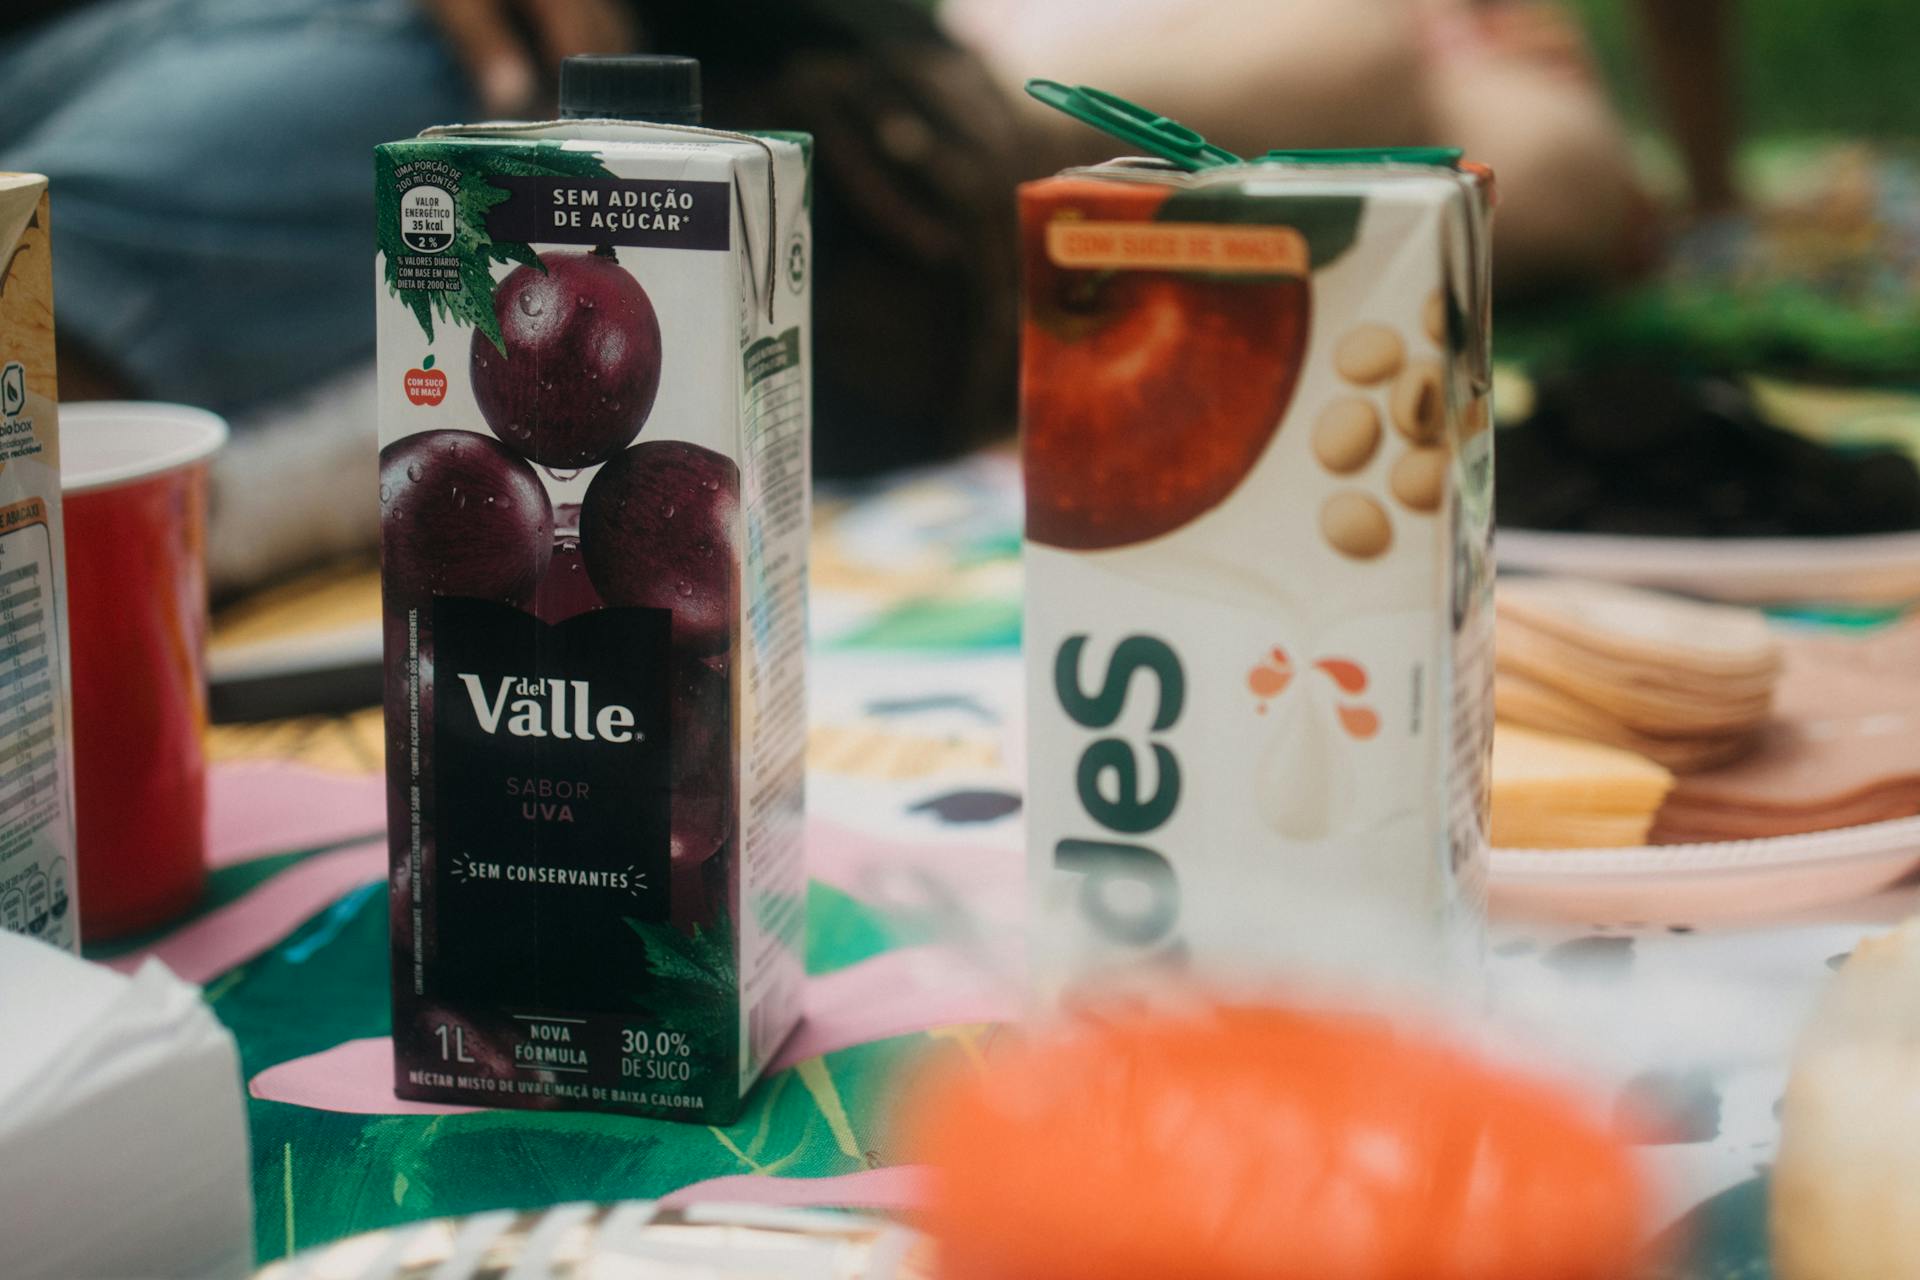 Two juice boxes on a table | Source: Pexels